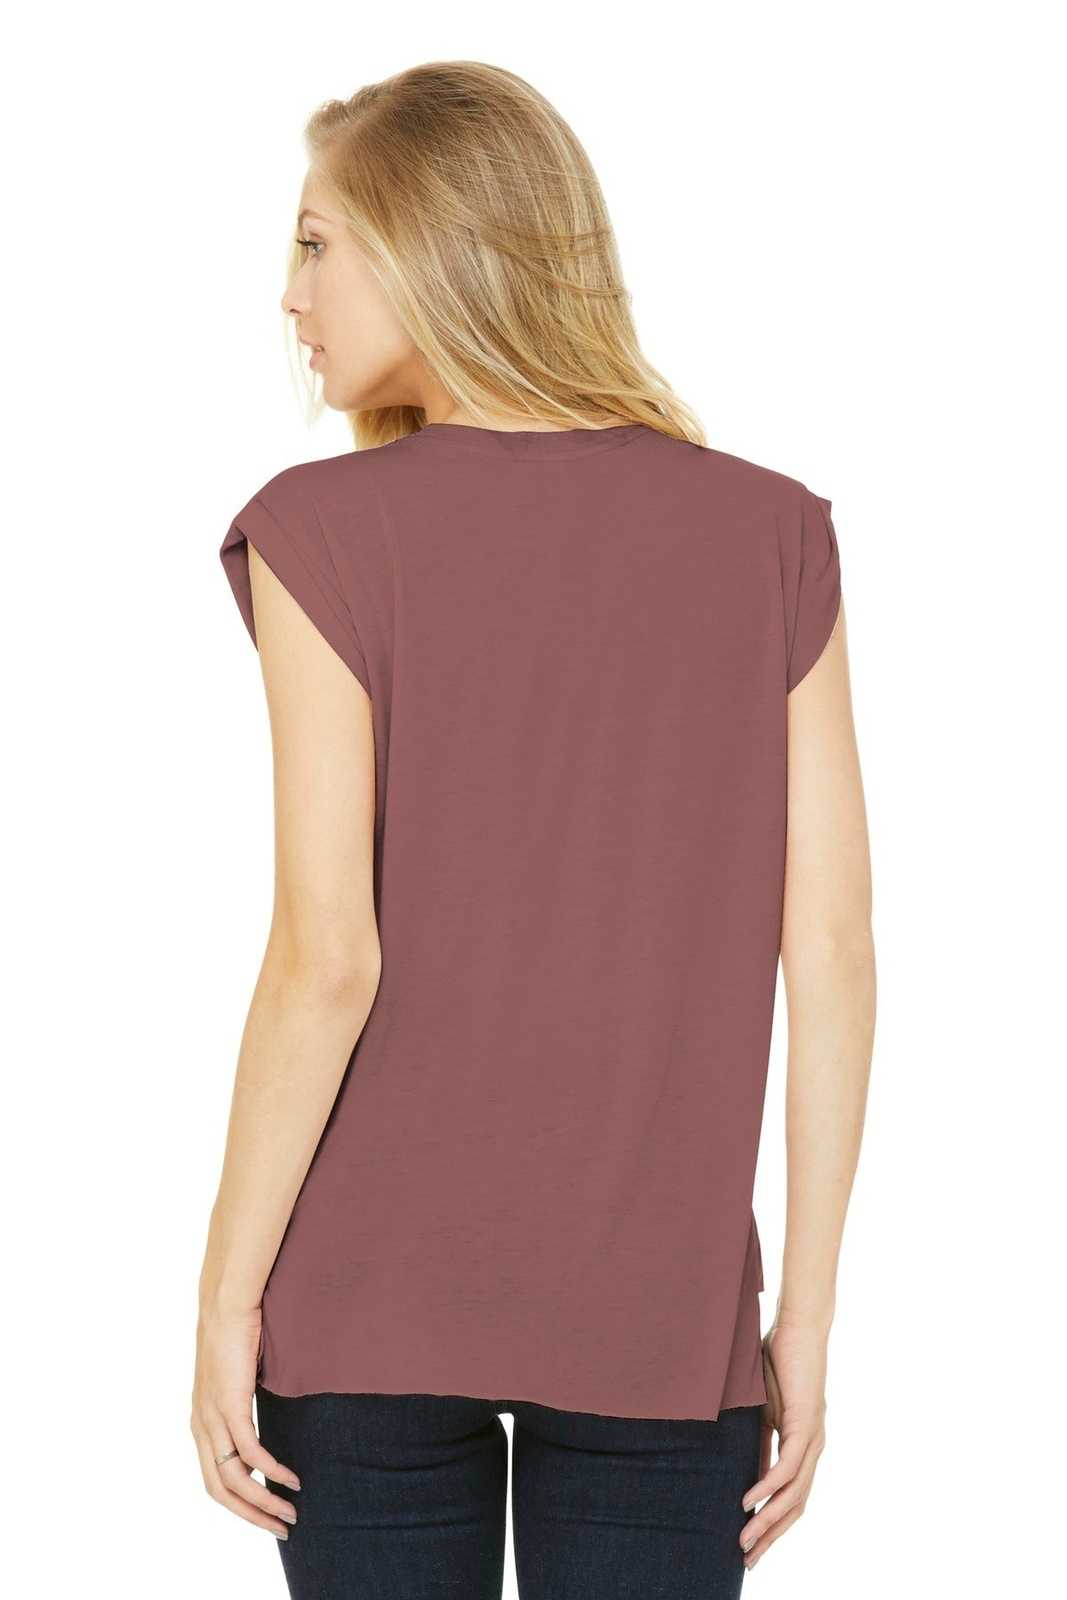 Bella + Canvas 8804 Women's Flowy Muscle Tee with Rolled Cuffs - Mauve - HIT a Double